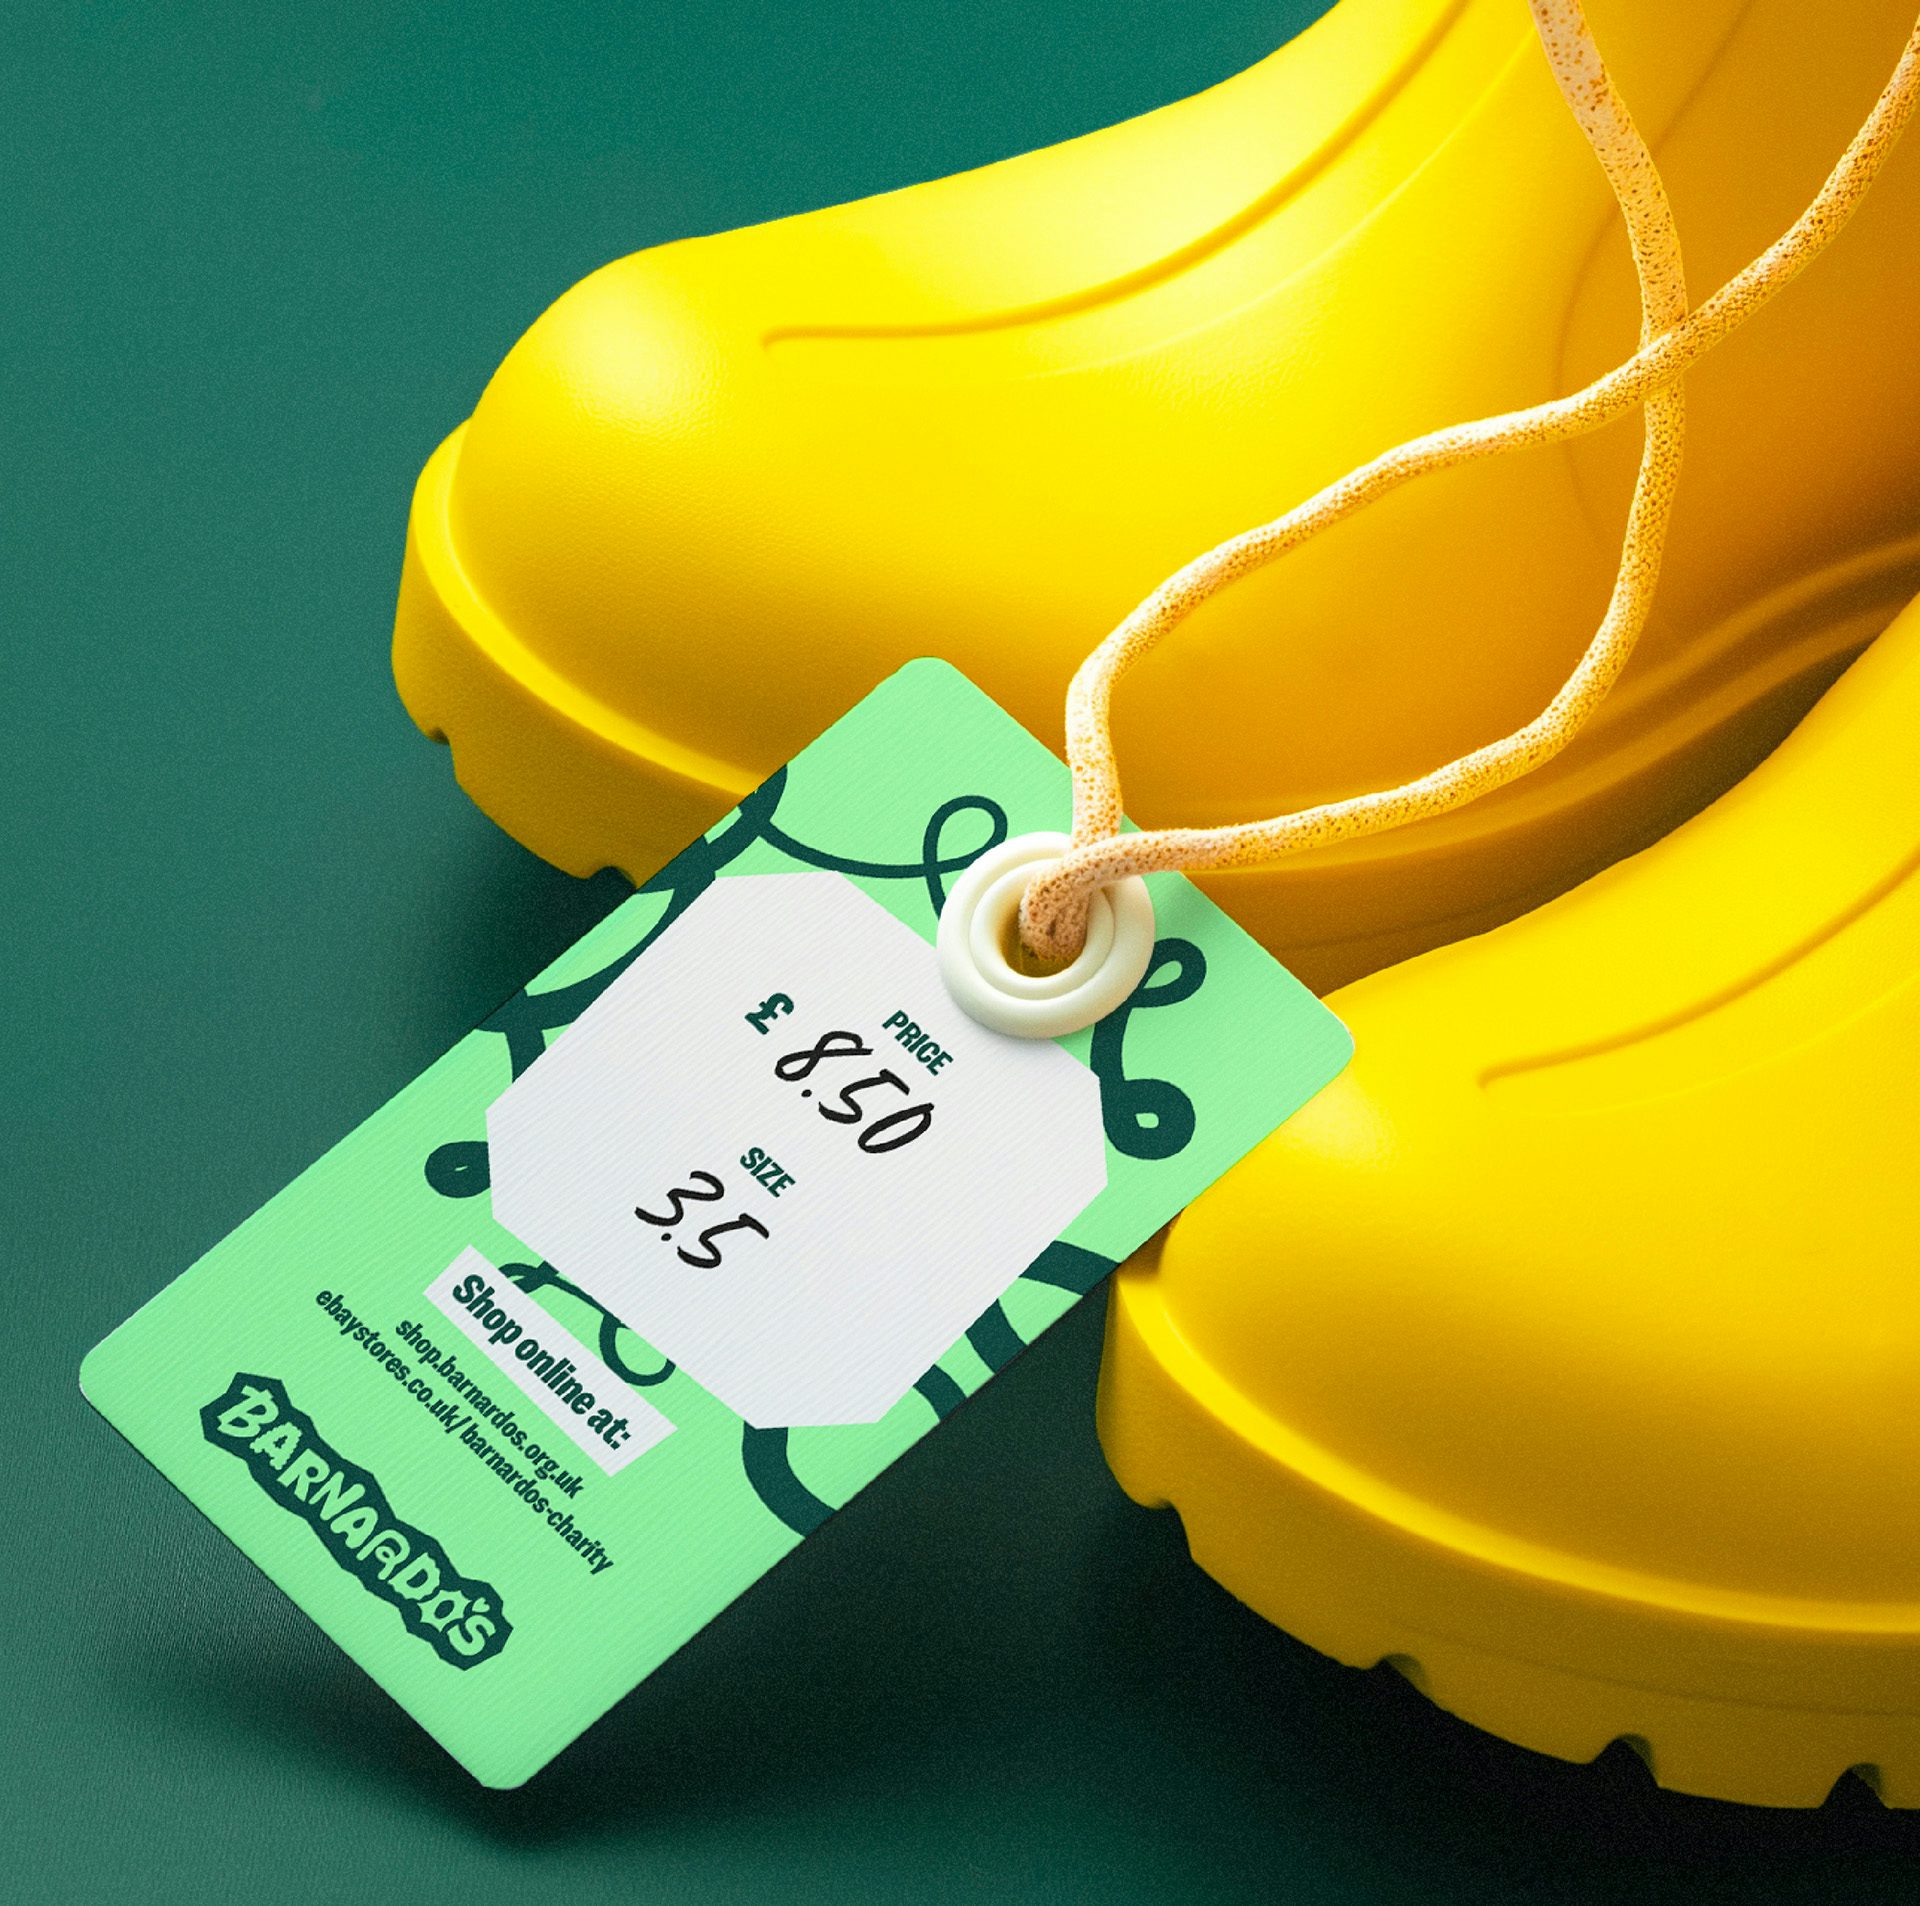 Image shows the new Barnardo's visual identity on a green clothing tag attached to yellow rubber boots